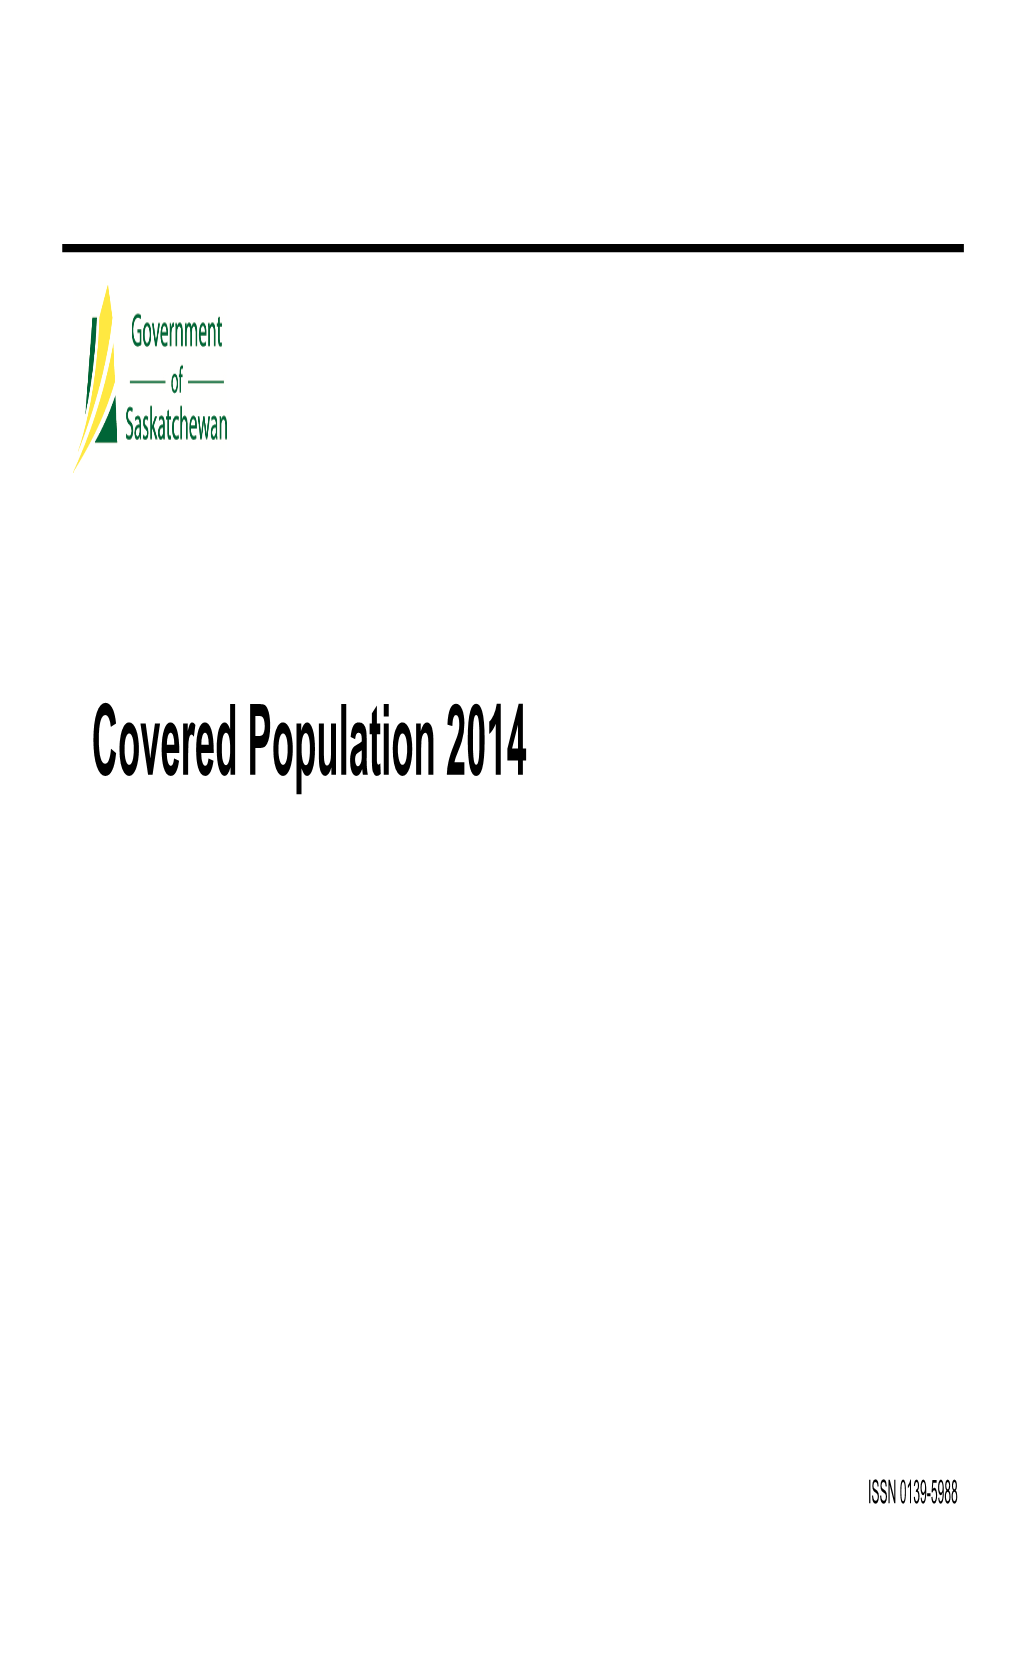 Covered Population 2014